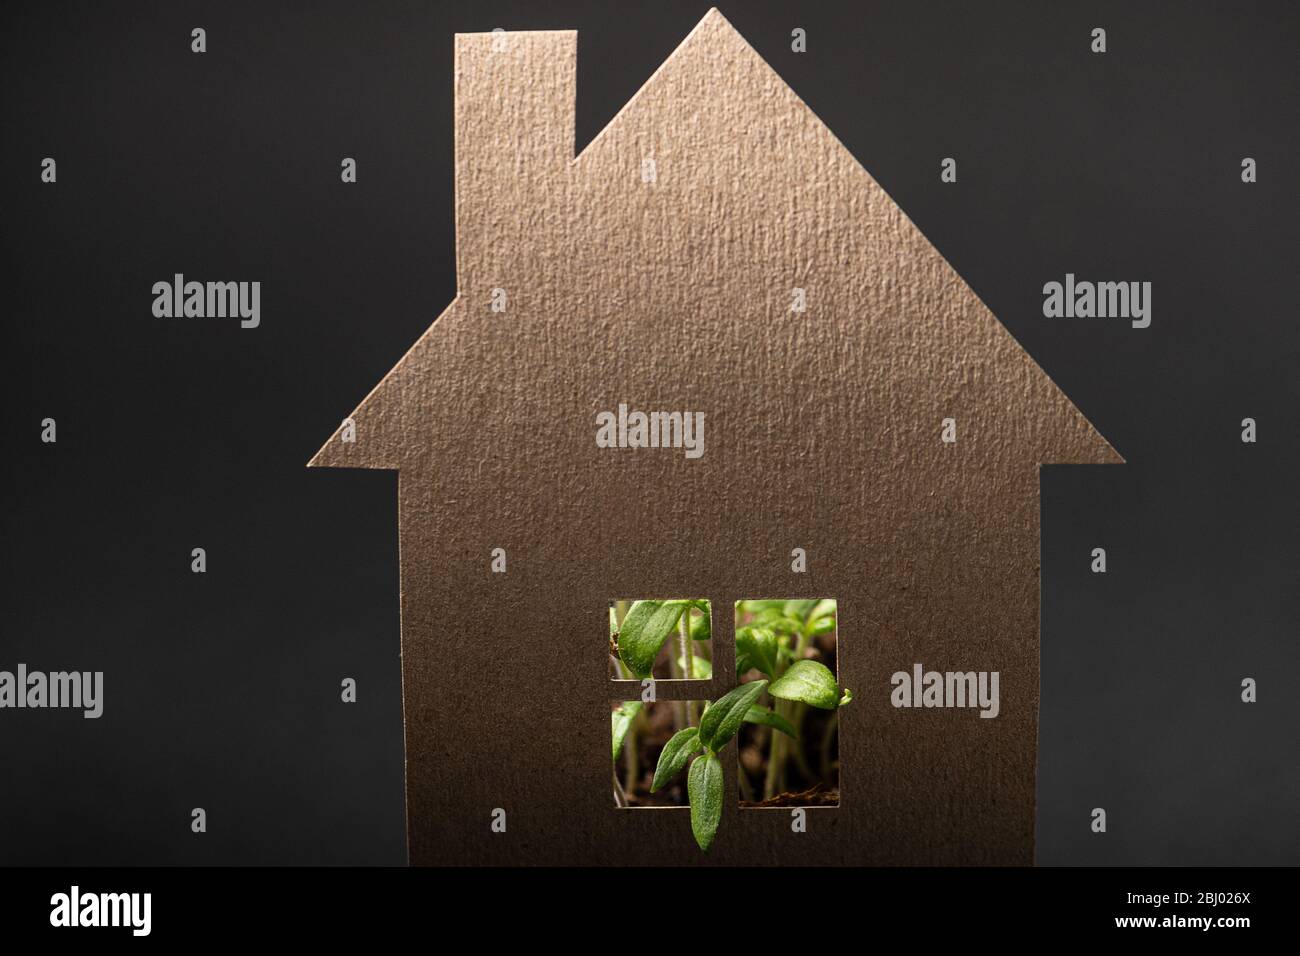 Plant leaves sticking out throw window of a cardboard 2d house over black Stock Photo